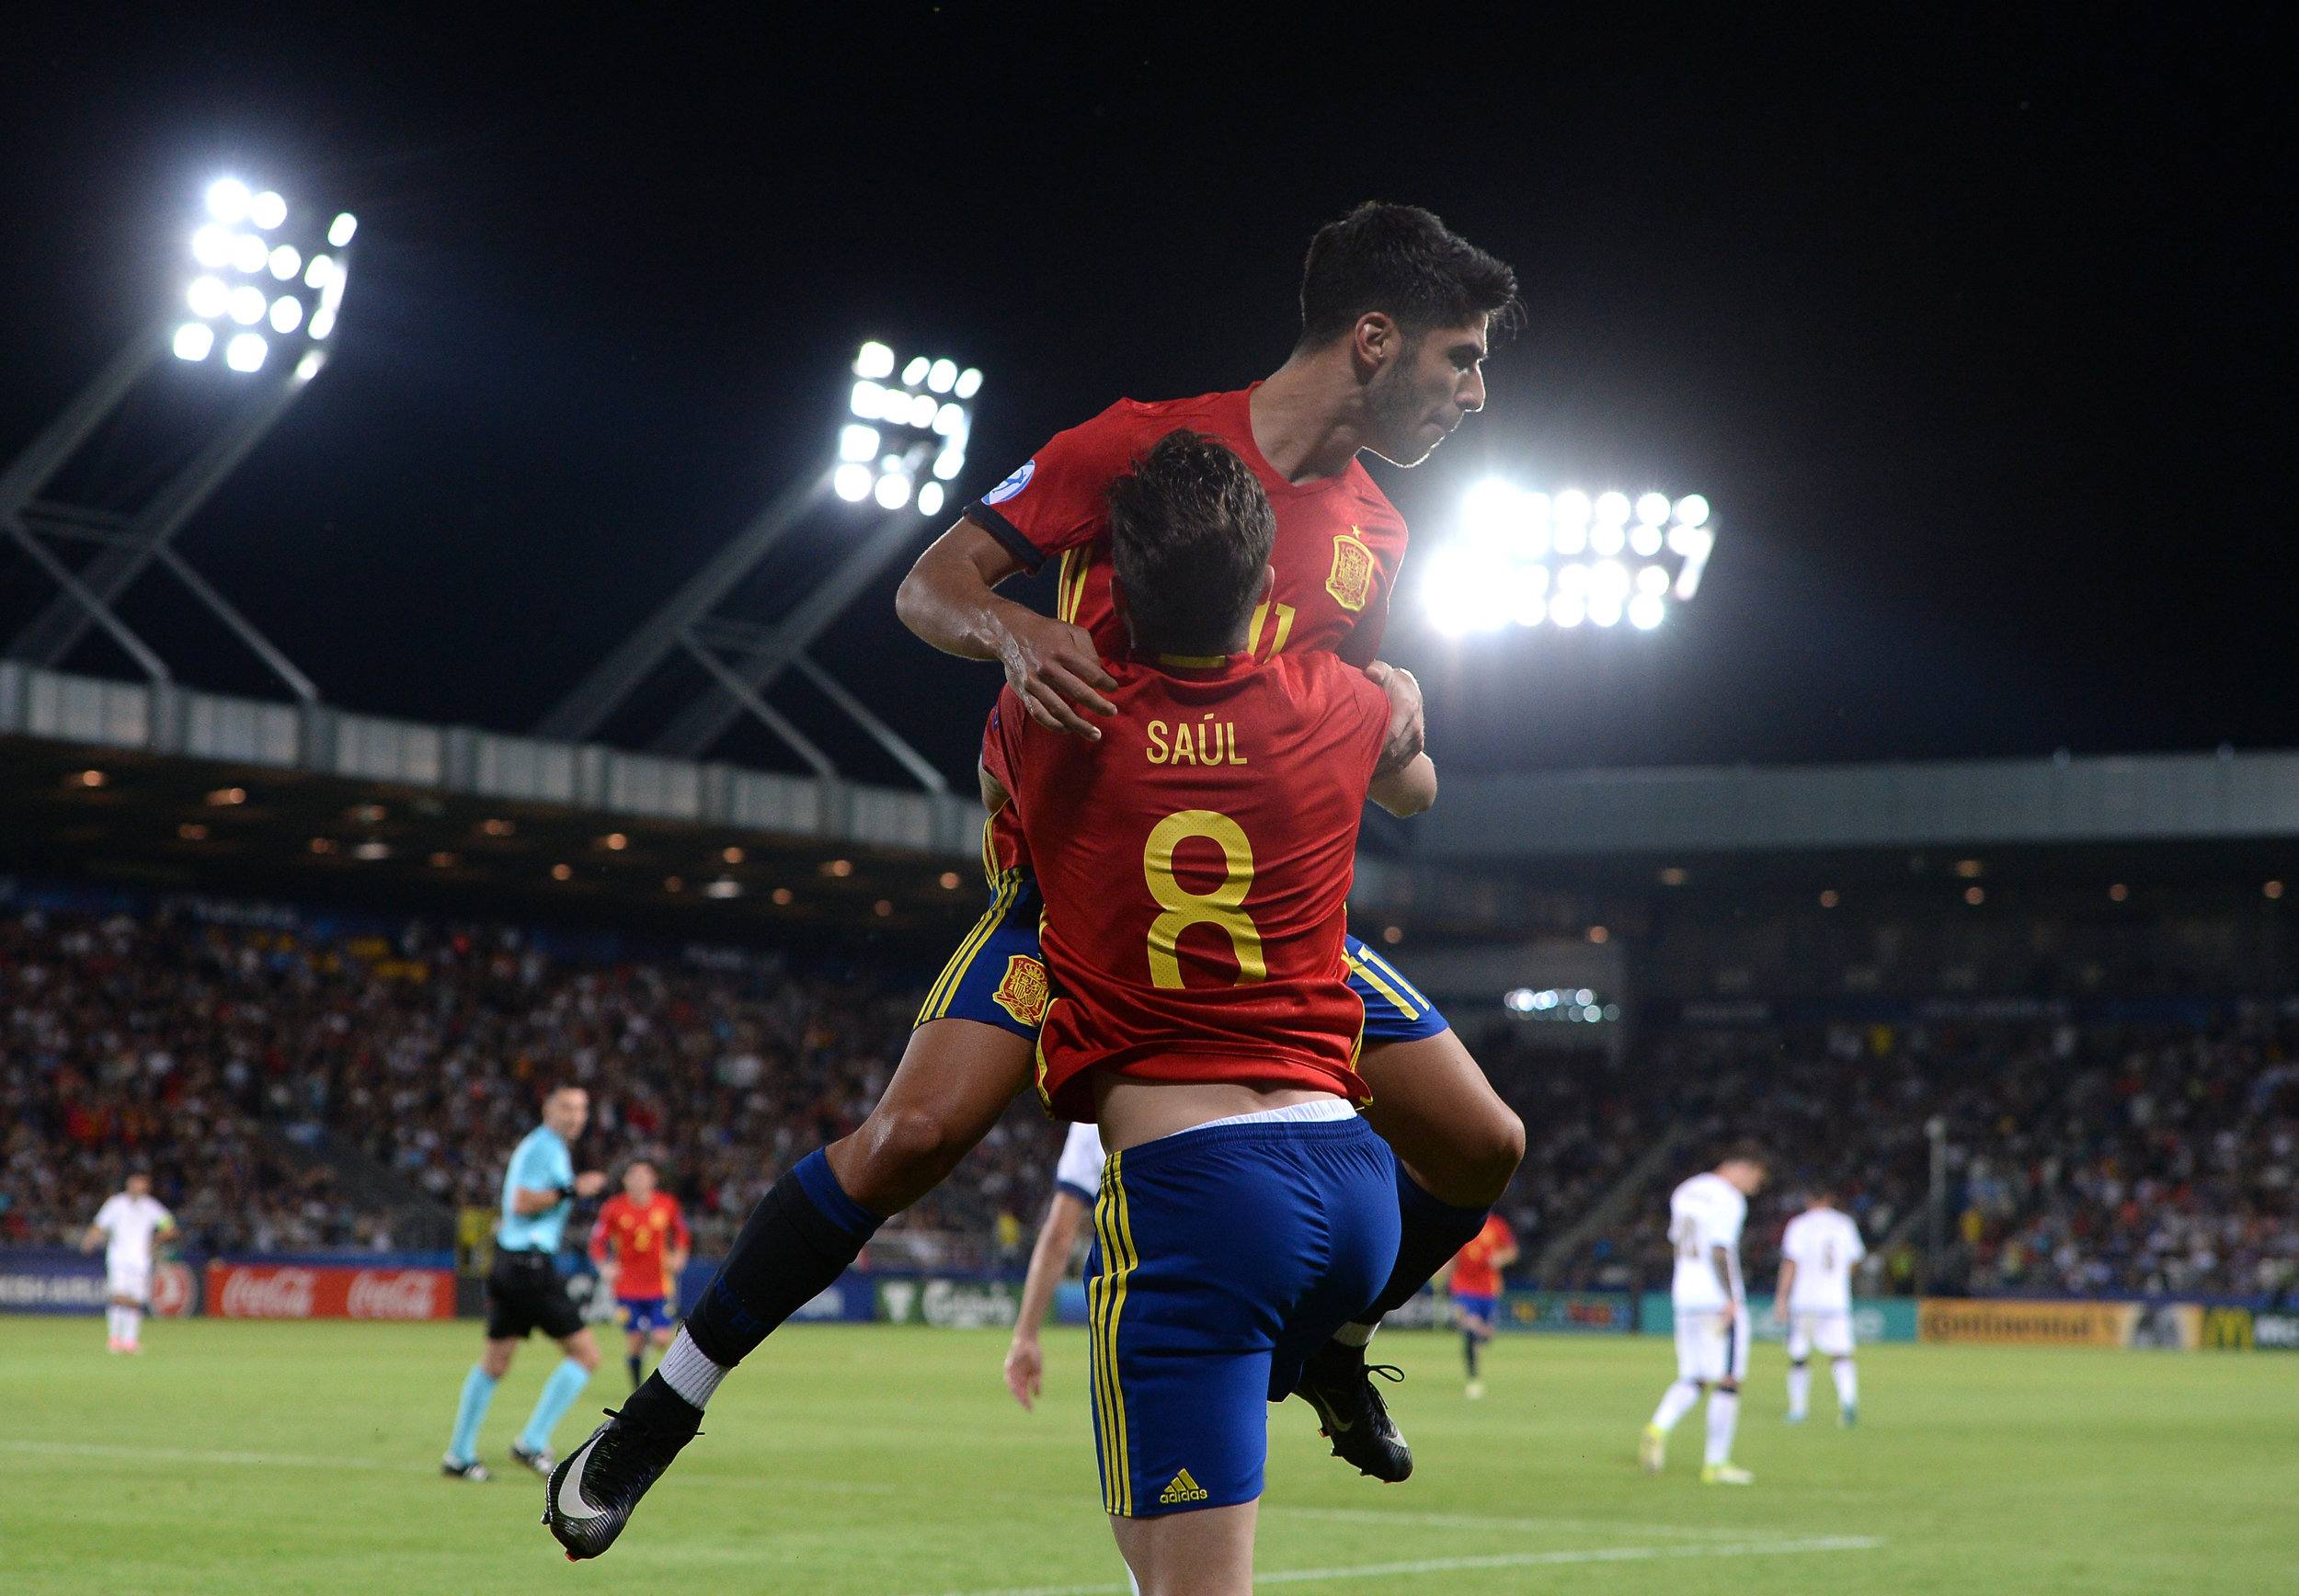  Marco Asensio of Spain celebrates with Saul Niguez after Saul scored their side's third goal against Italy in the semi-final match in Poland 2017 /  UEFA / Sportsfile  